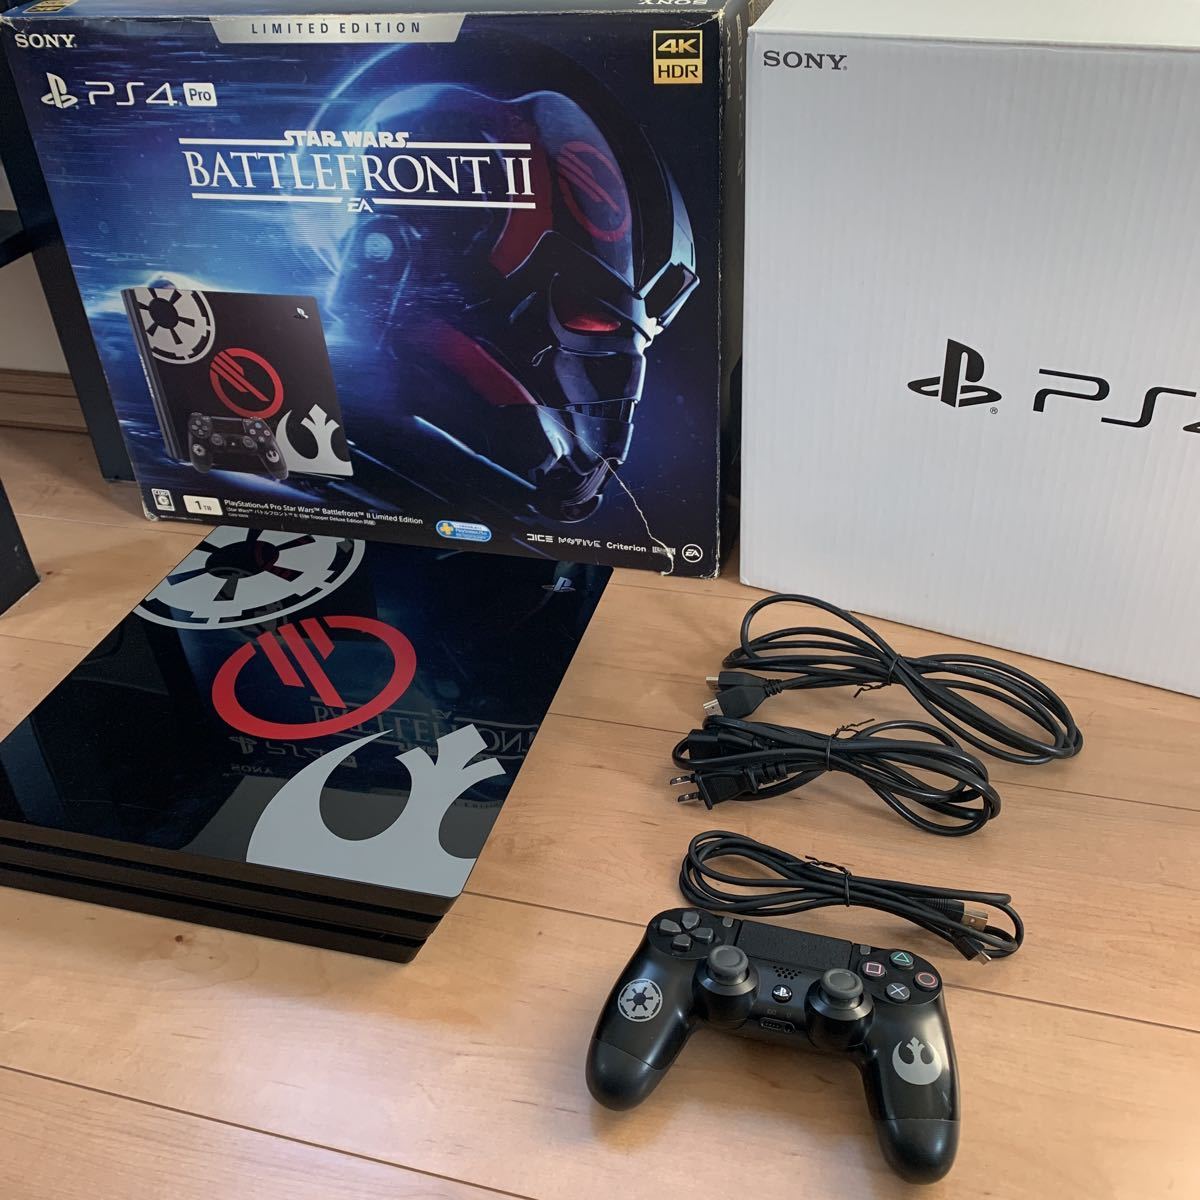 lugt gentage marionet PS4 Pro 本体/箱 セット Star Wars Battlefront II Limited Edition CUHJ-10019 初期化  動作確認済 スターウォーズ | knowhowtrg.com